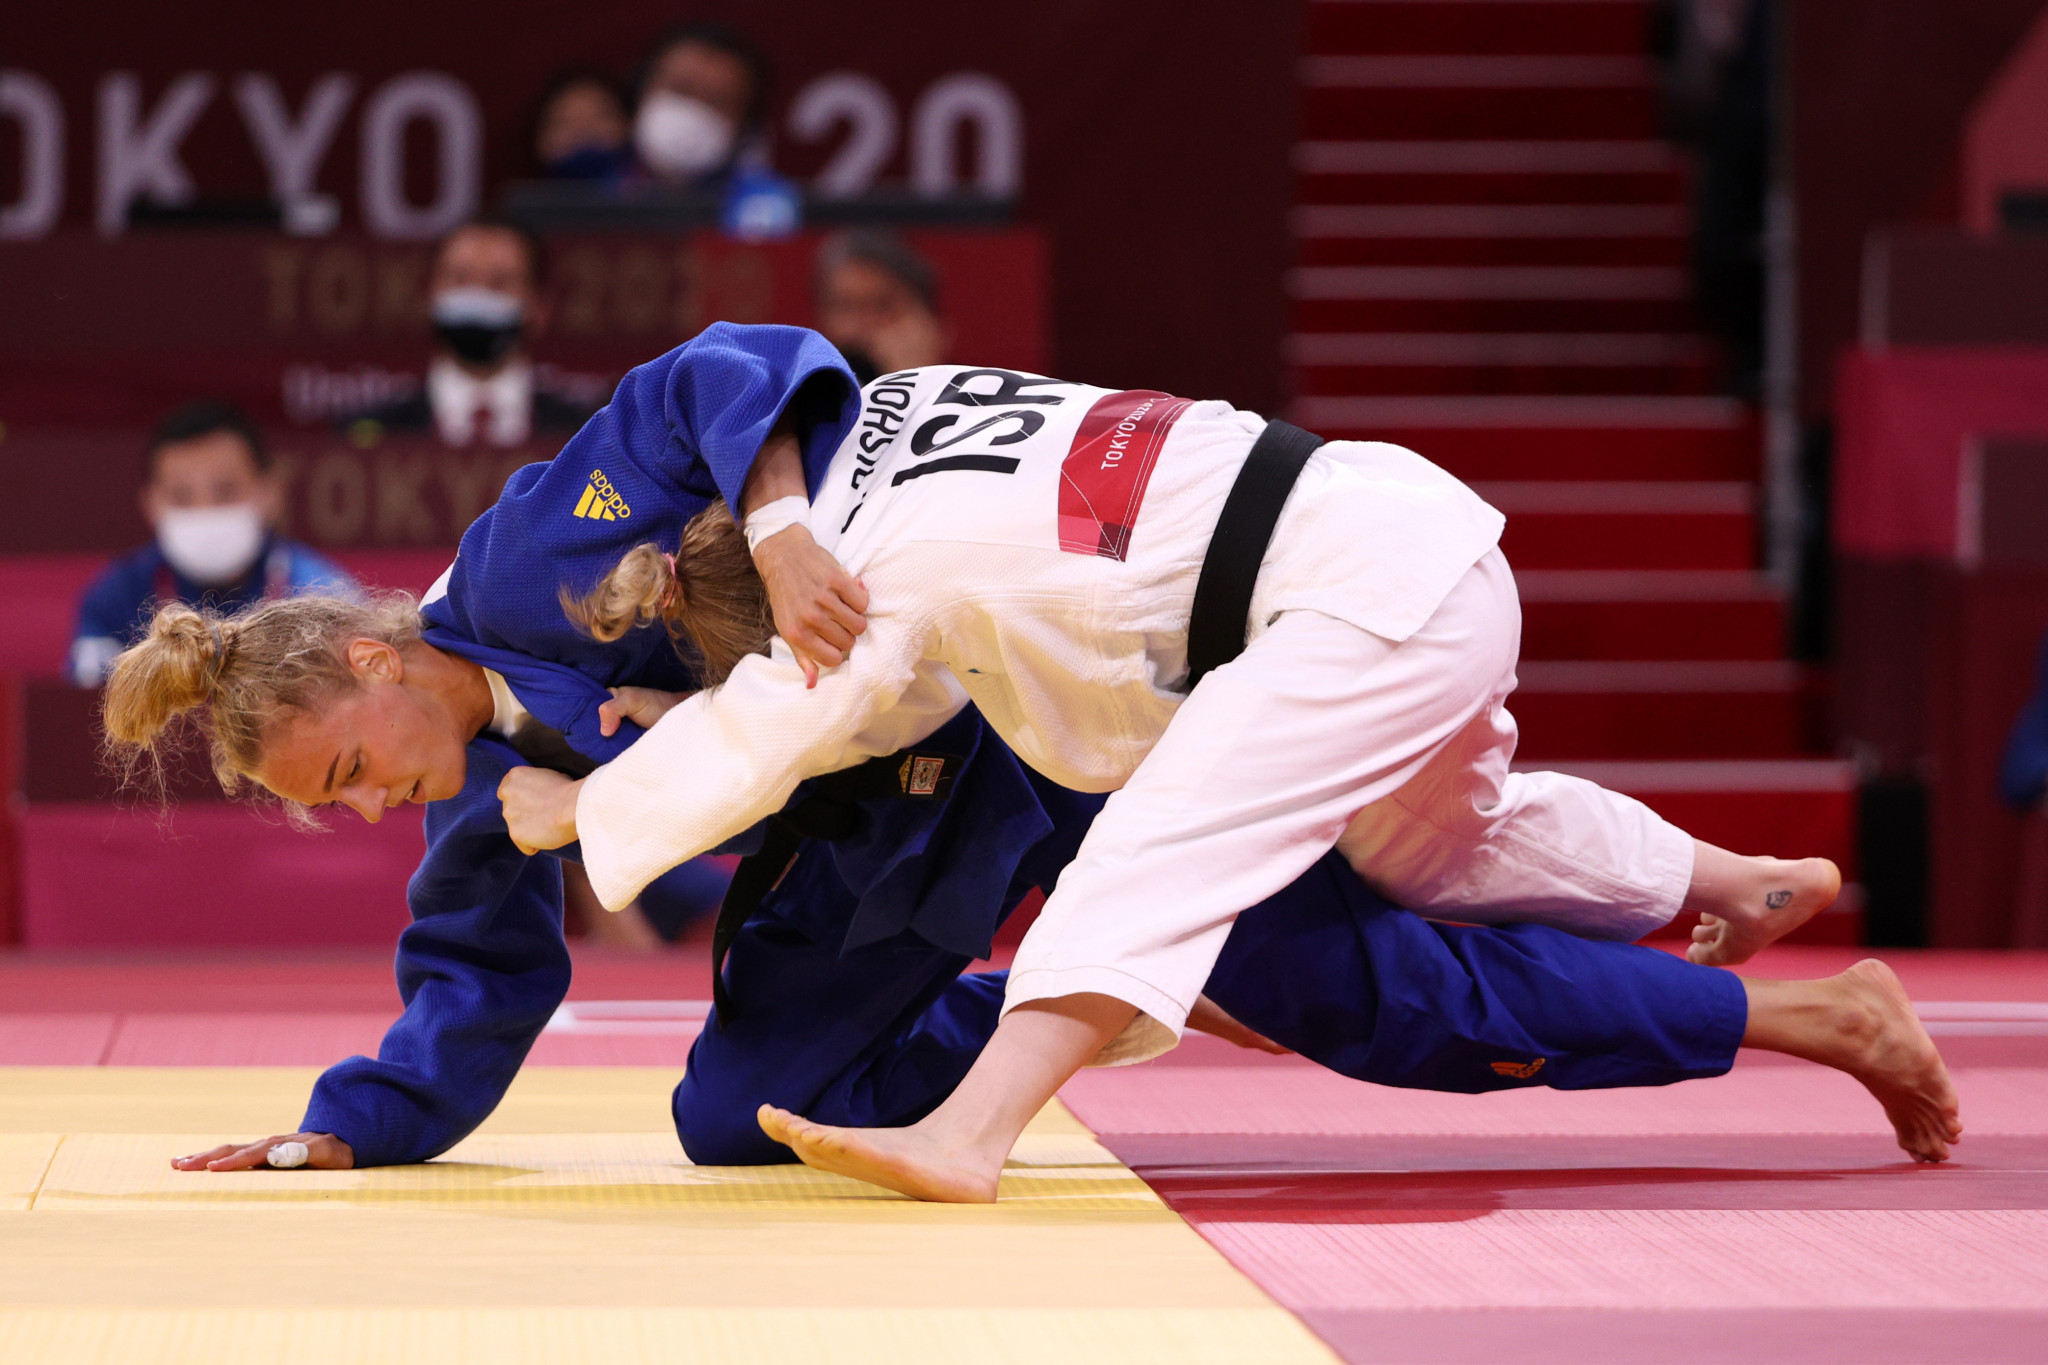 A total of 15 Ukrainian athletes are set to compete at the 2022 European Judo Championships in Sofia ©Getty Images